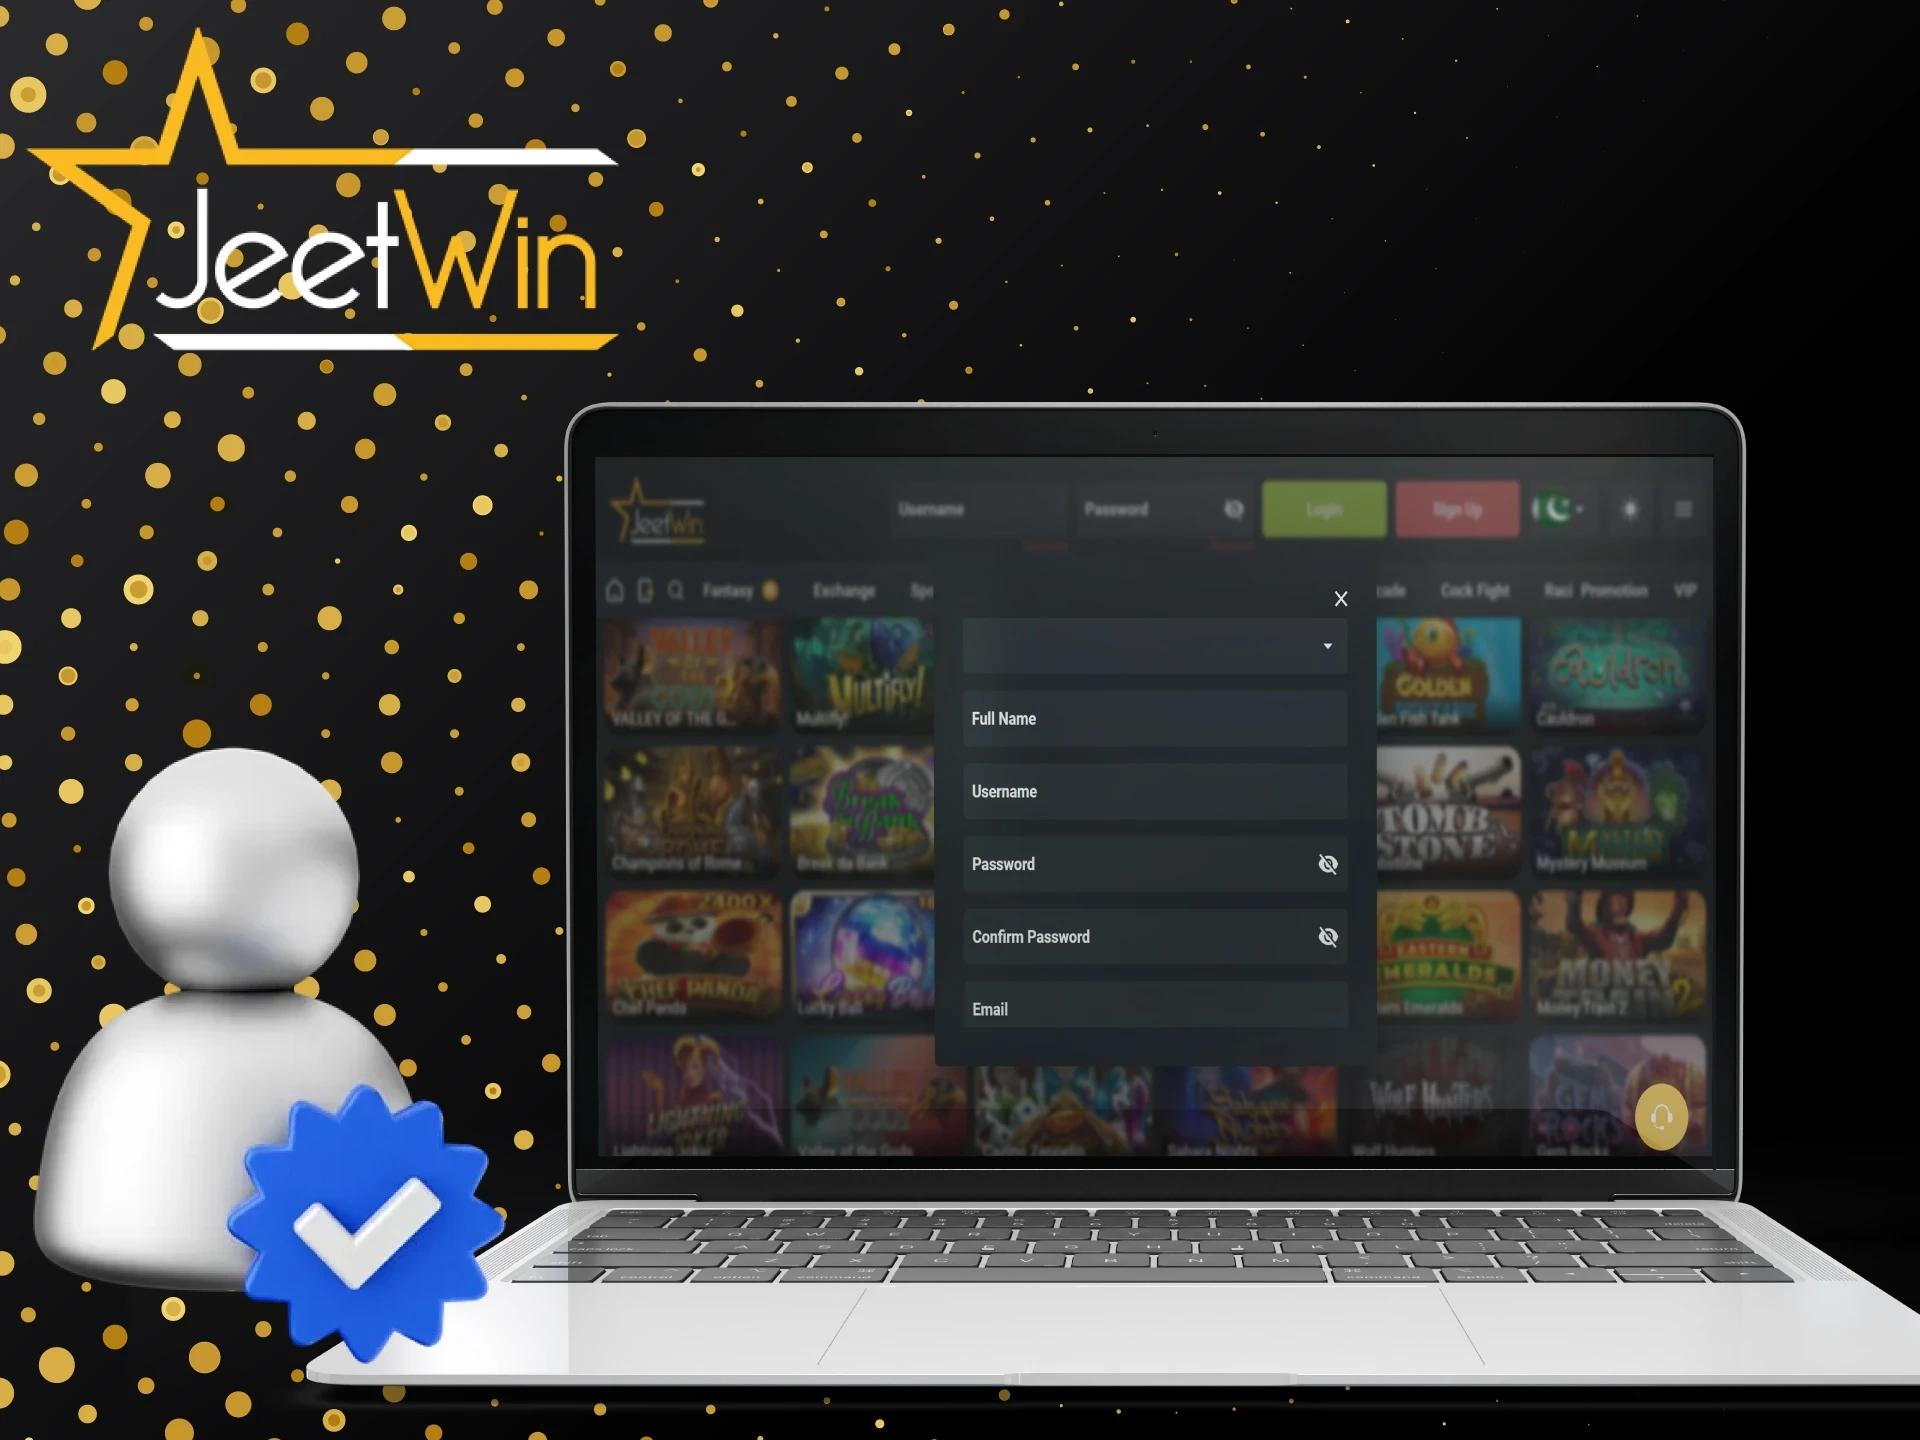 Sign up at JeetWin, spin the reels and enjoy slot games.